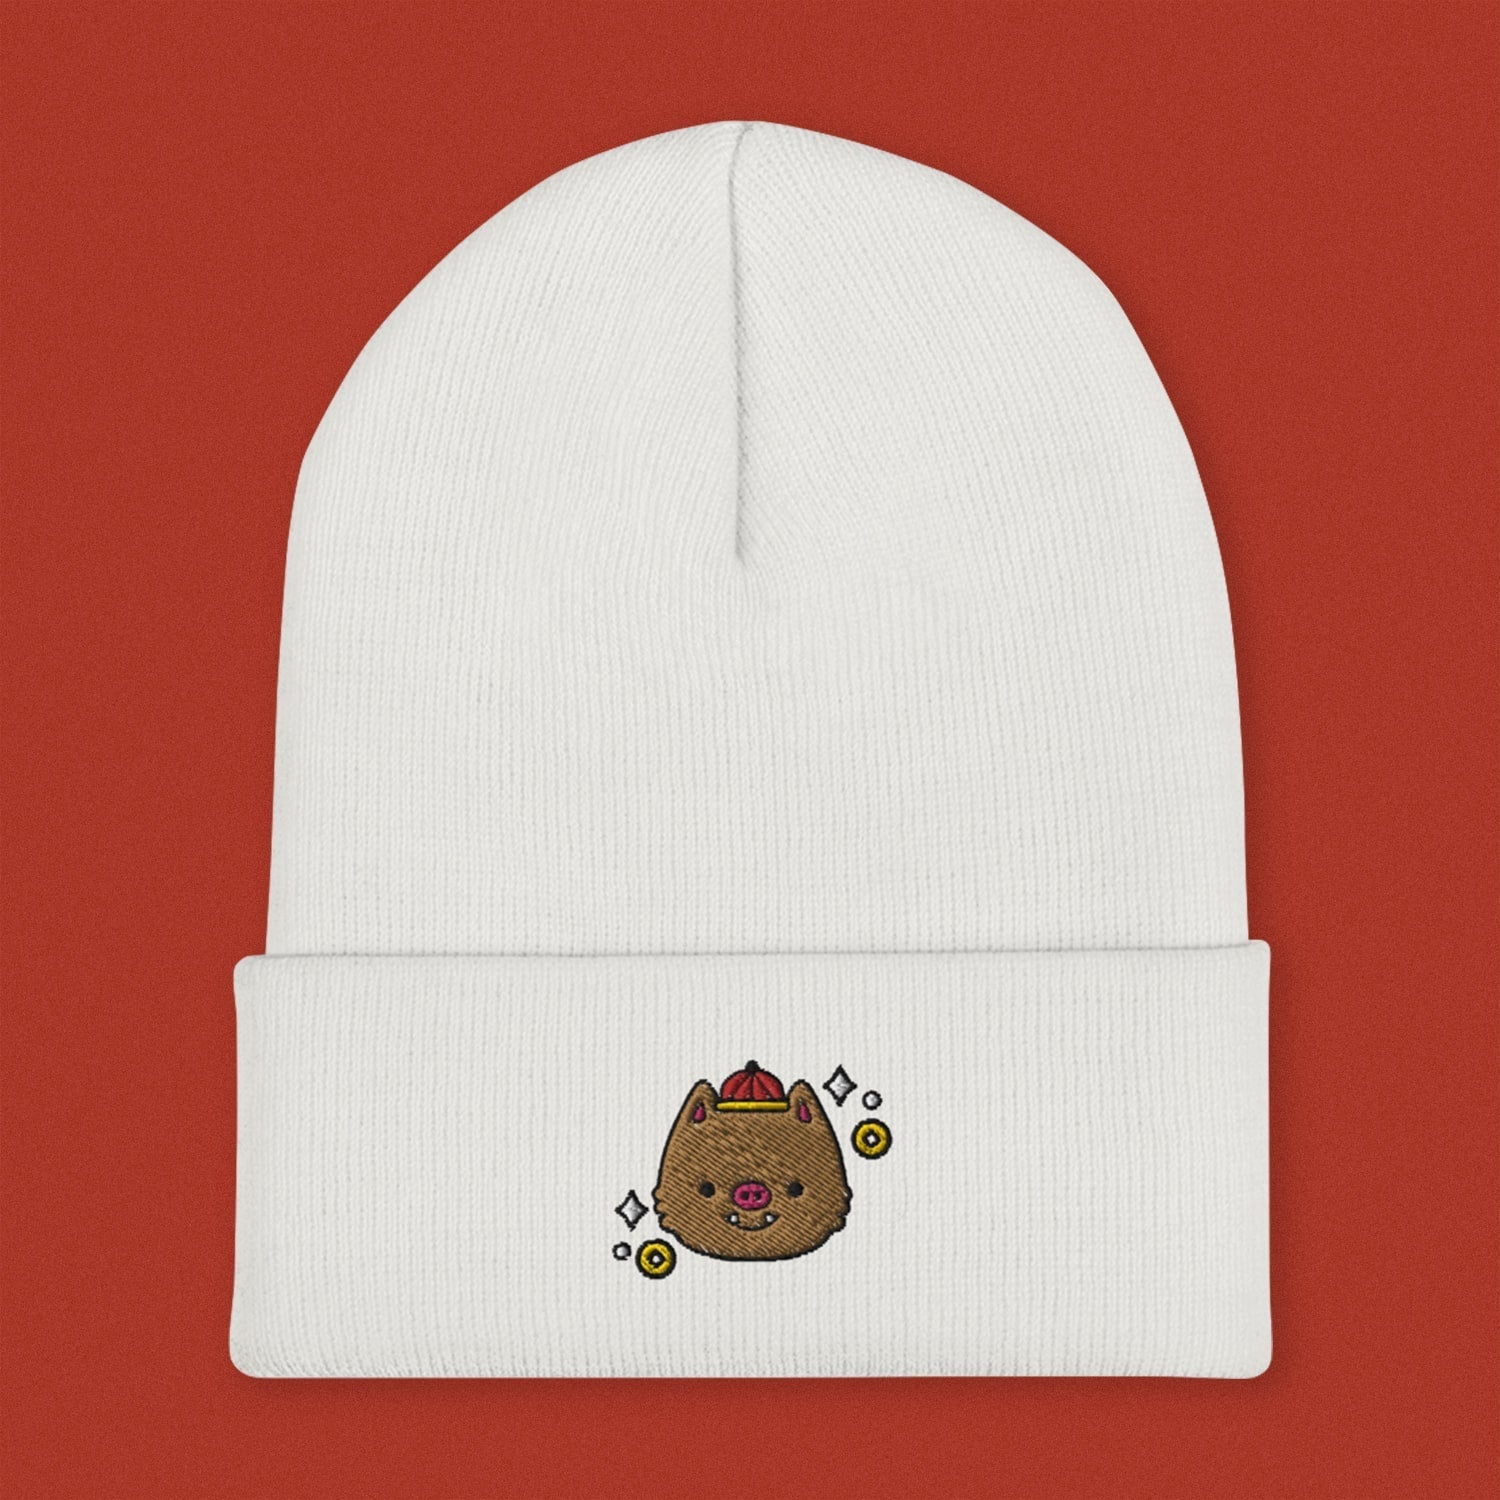 Year of the Pig Embroidered Beanie - Ni De Mama Chinese Clothing